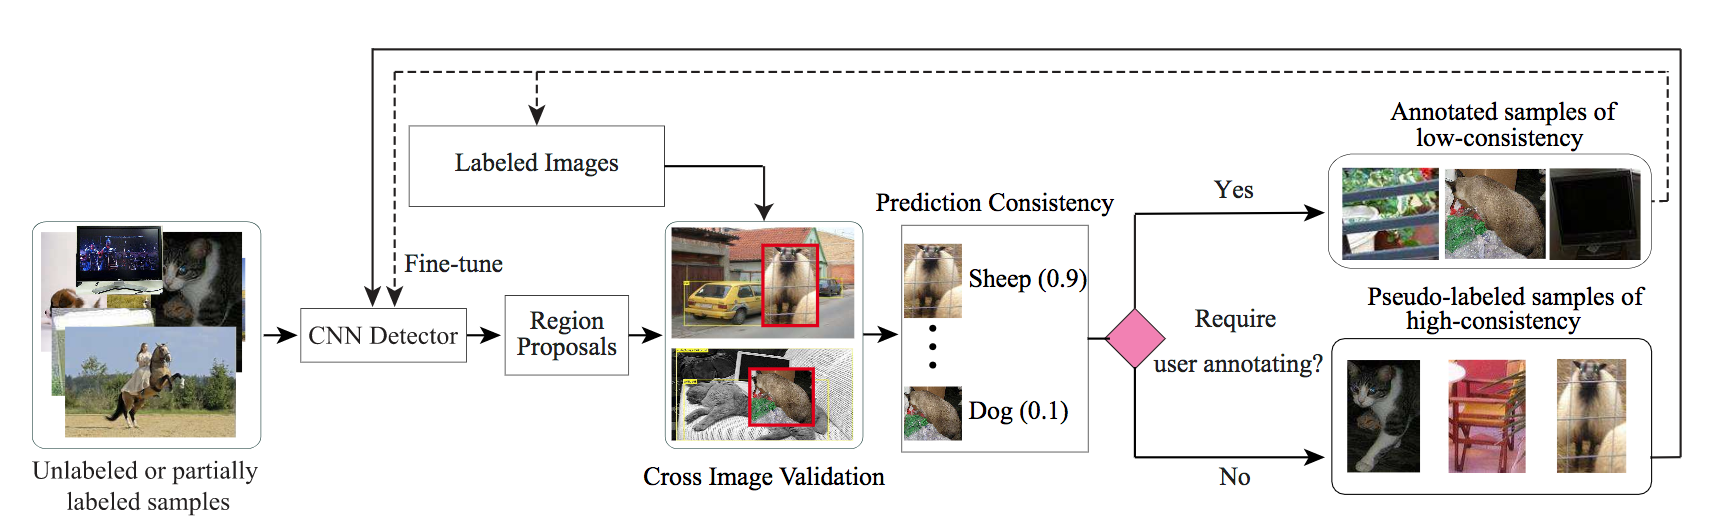 Towards_Human-Machine_Cooperation_Self-Supervised_Sample_Mining_for_Object_Detection